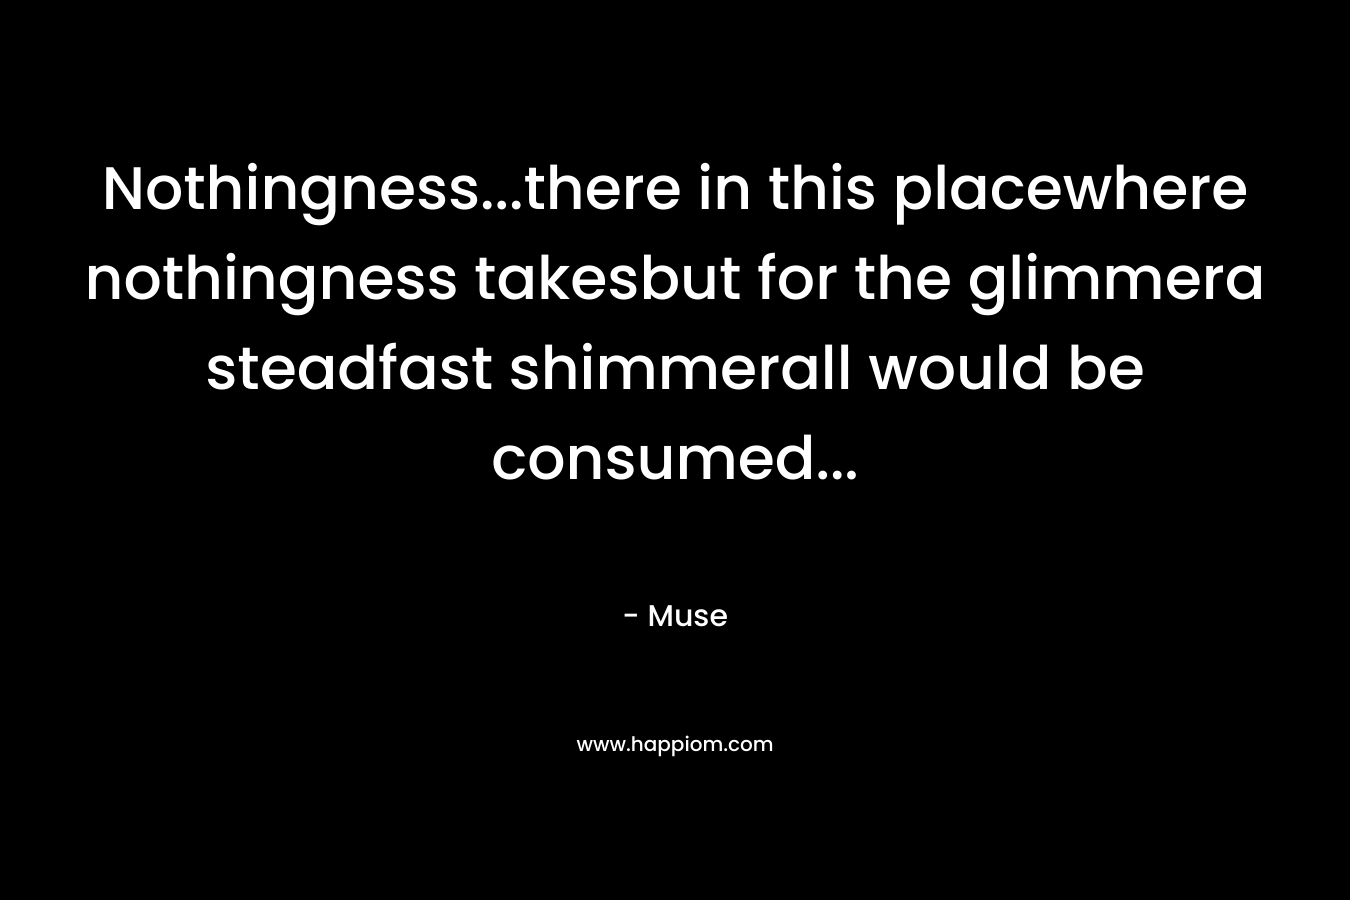 Nothingness…there in this placewhere nothingness takesbut for the glimmera steadfast shimmerall would be consumed… – Muse